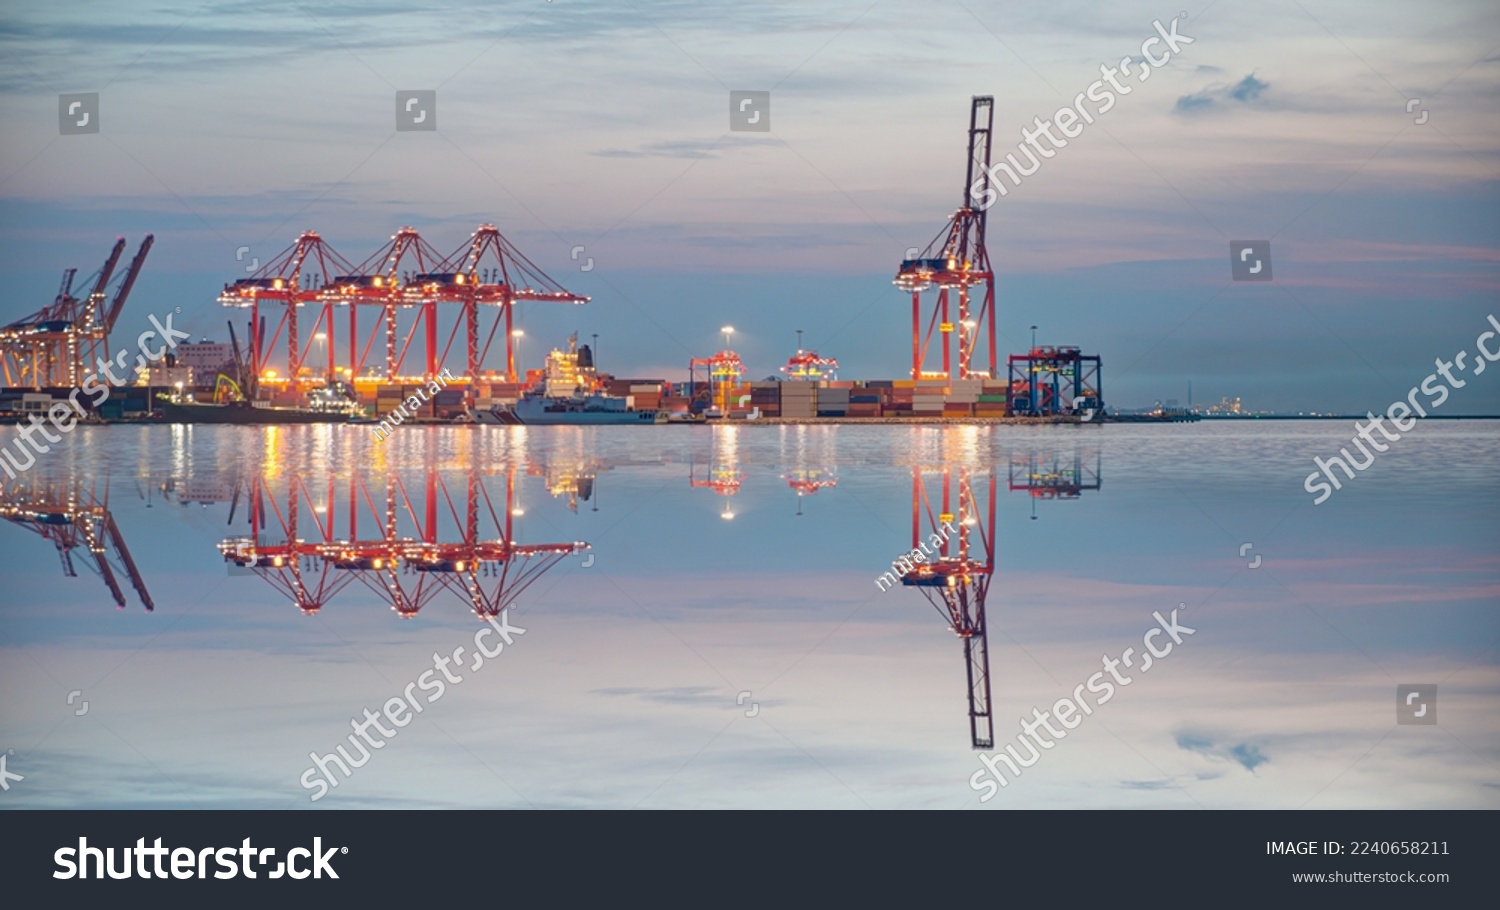 Container terminal in industrial port with cranes - Ship loading in port with busy port at night - Mersin, Turkey #2240658211